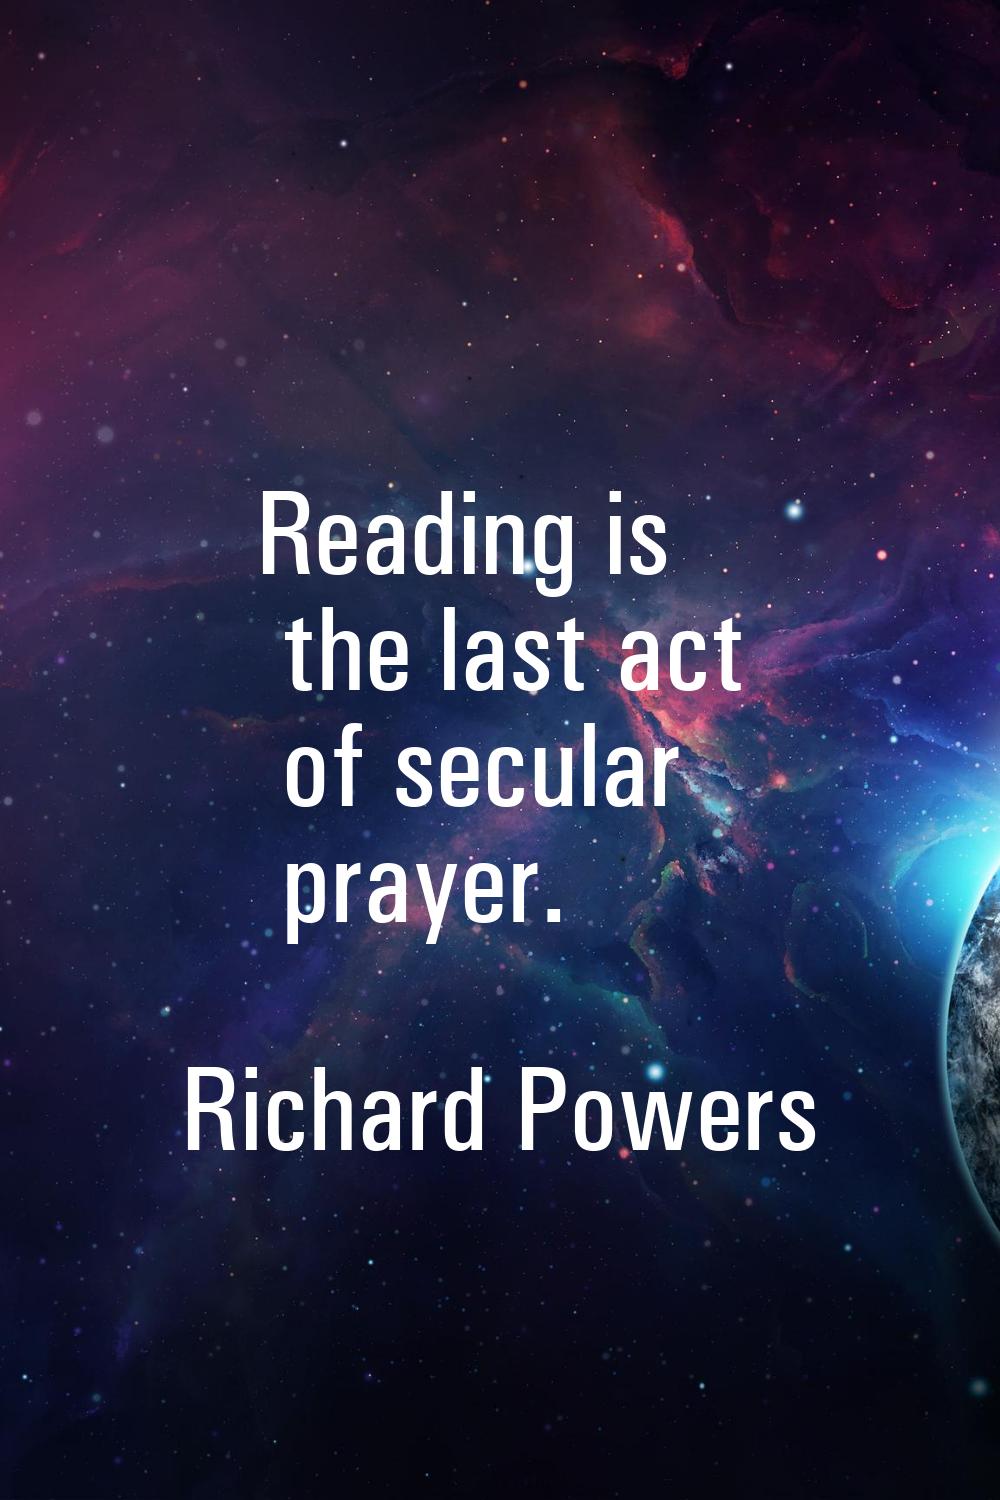 Reading is the last act of secular prayer.